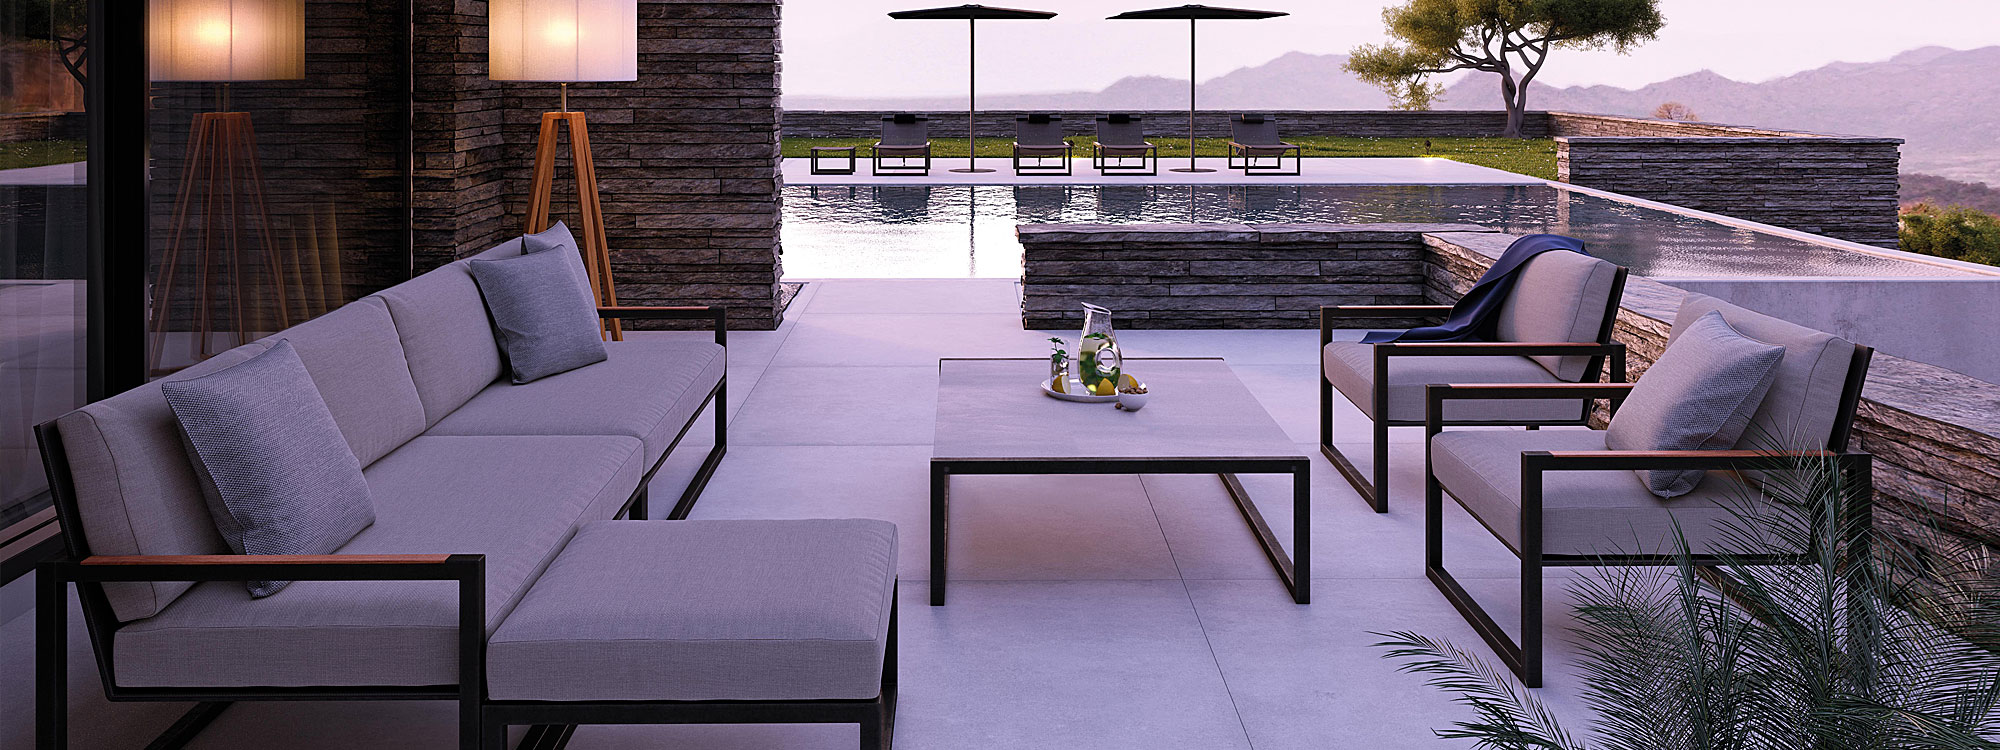 Photo of luxurious modern outdoor lounge furniture with pool on terrace